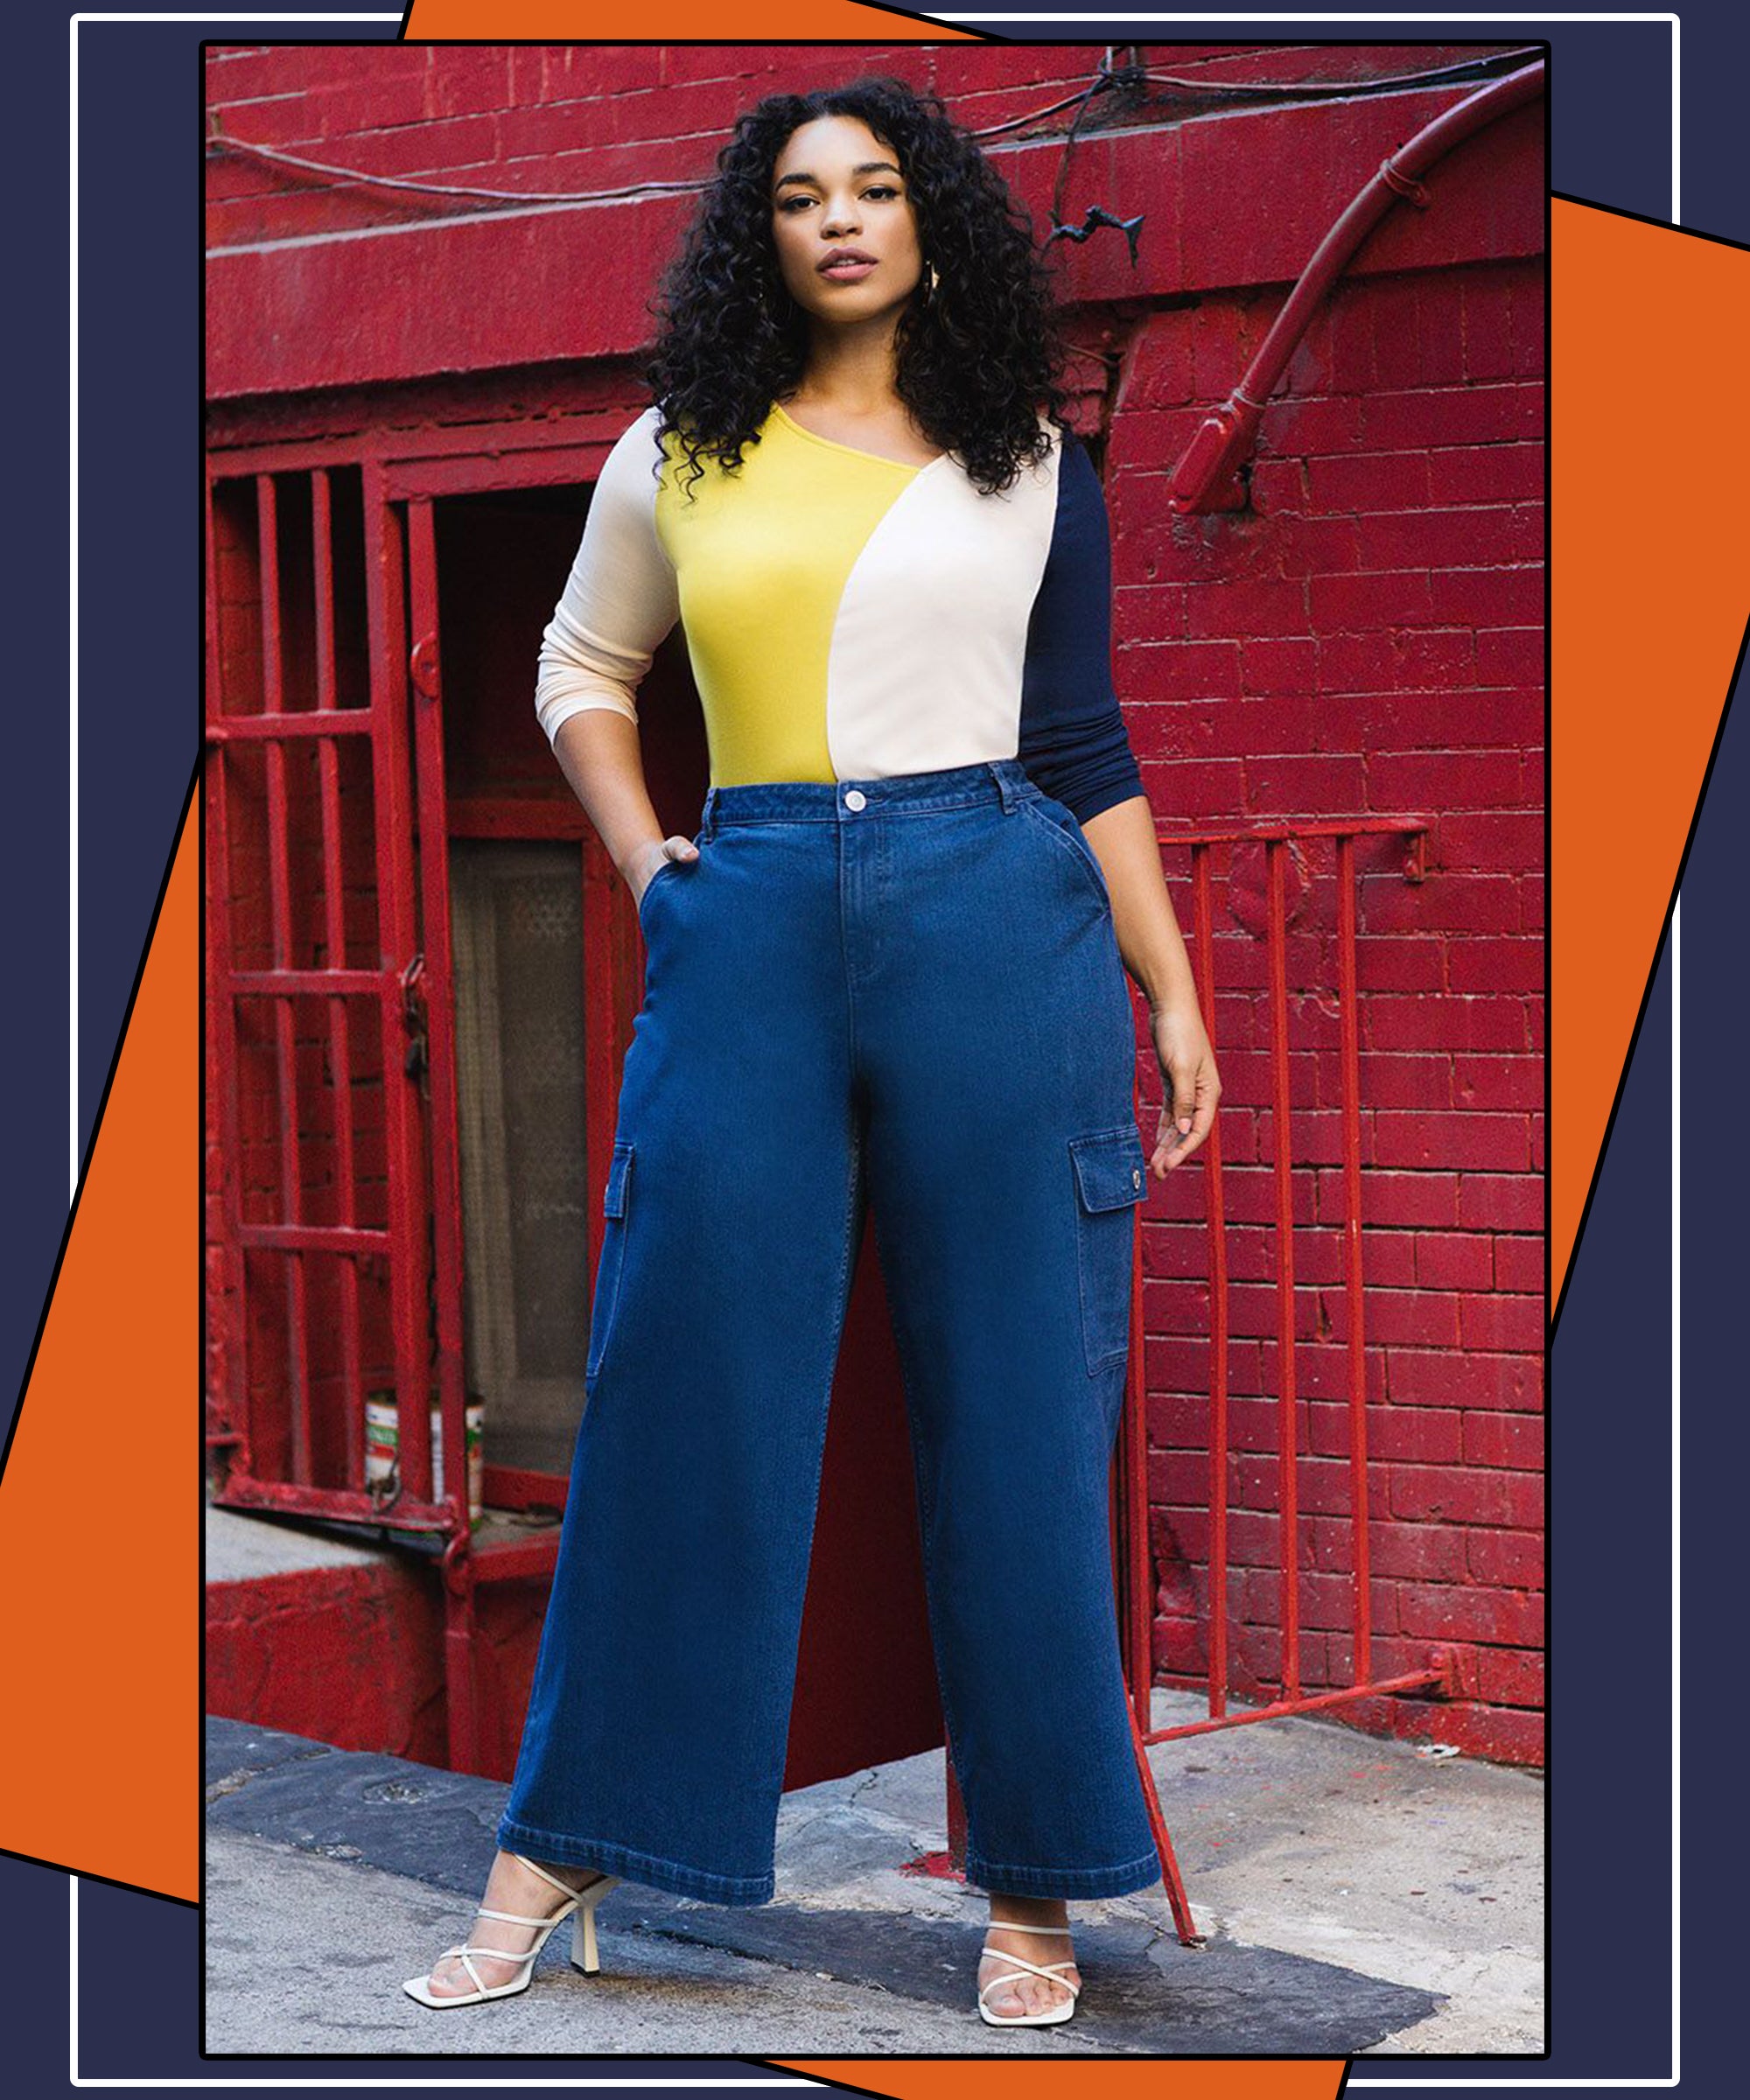 How to style plus-size high waisted jeans